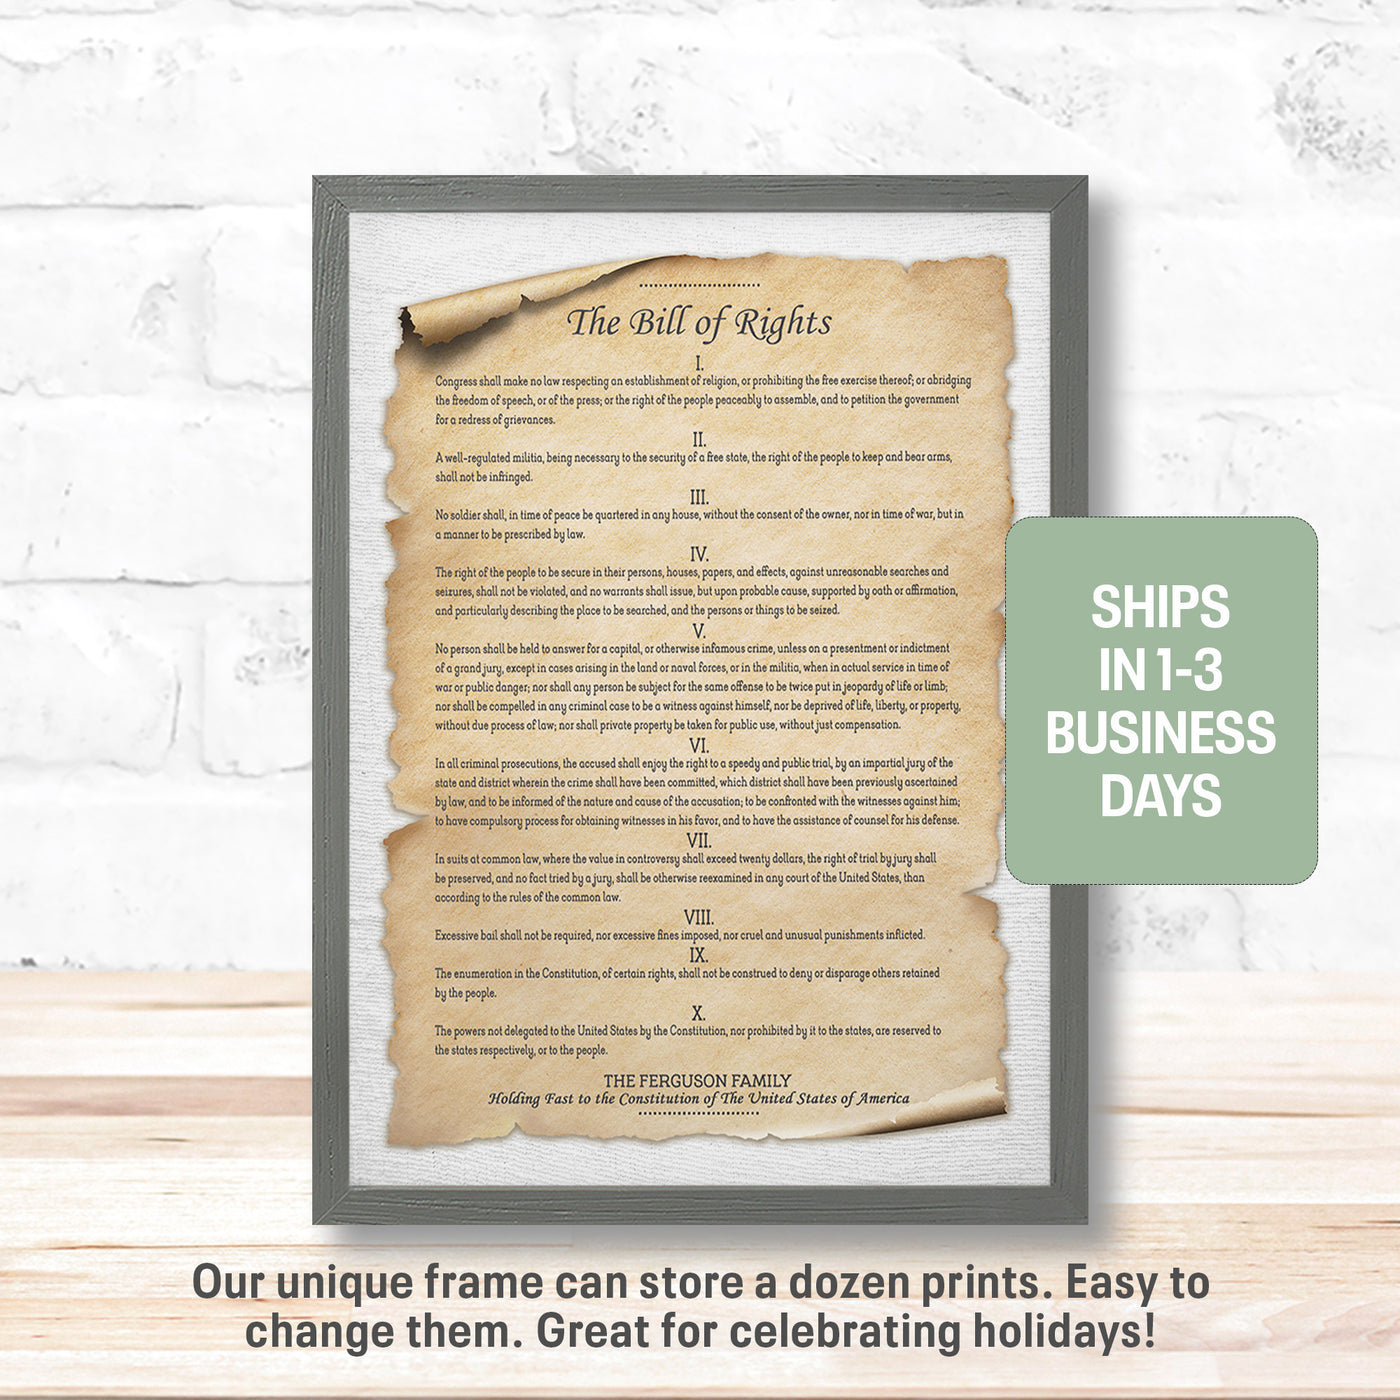 The Bill of Rights | Personalized Print, Wall Decor